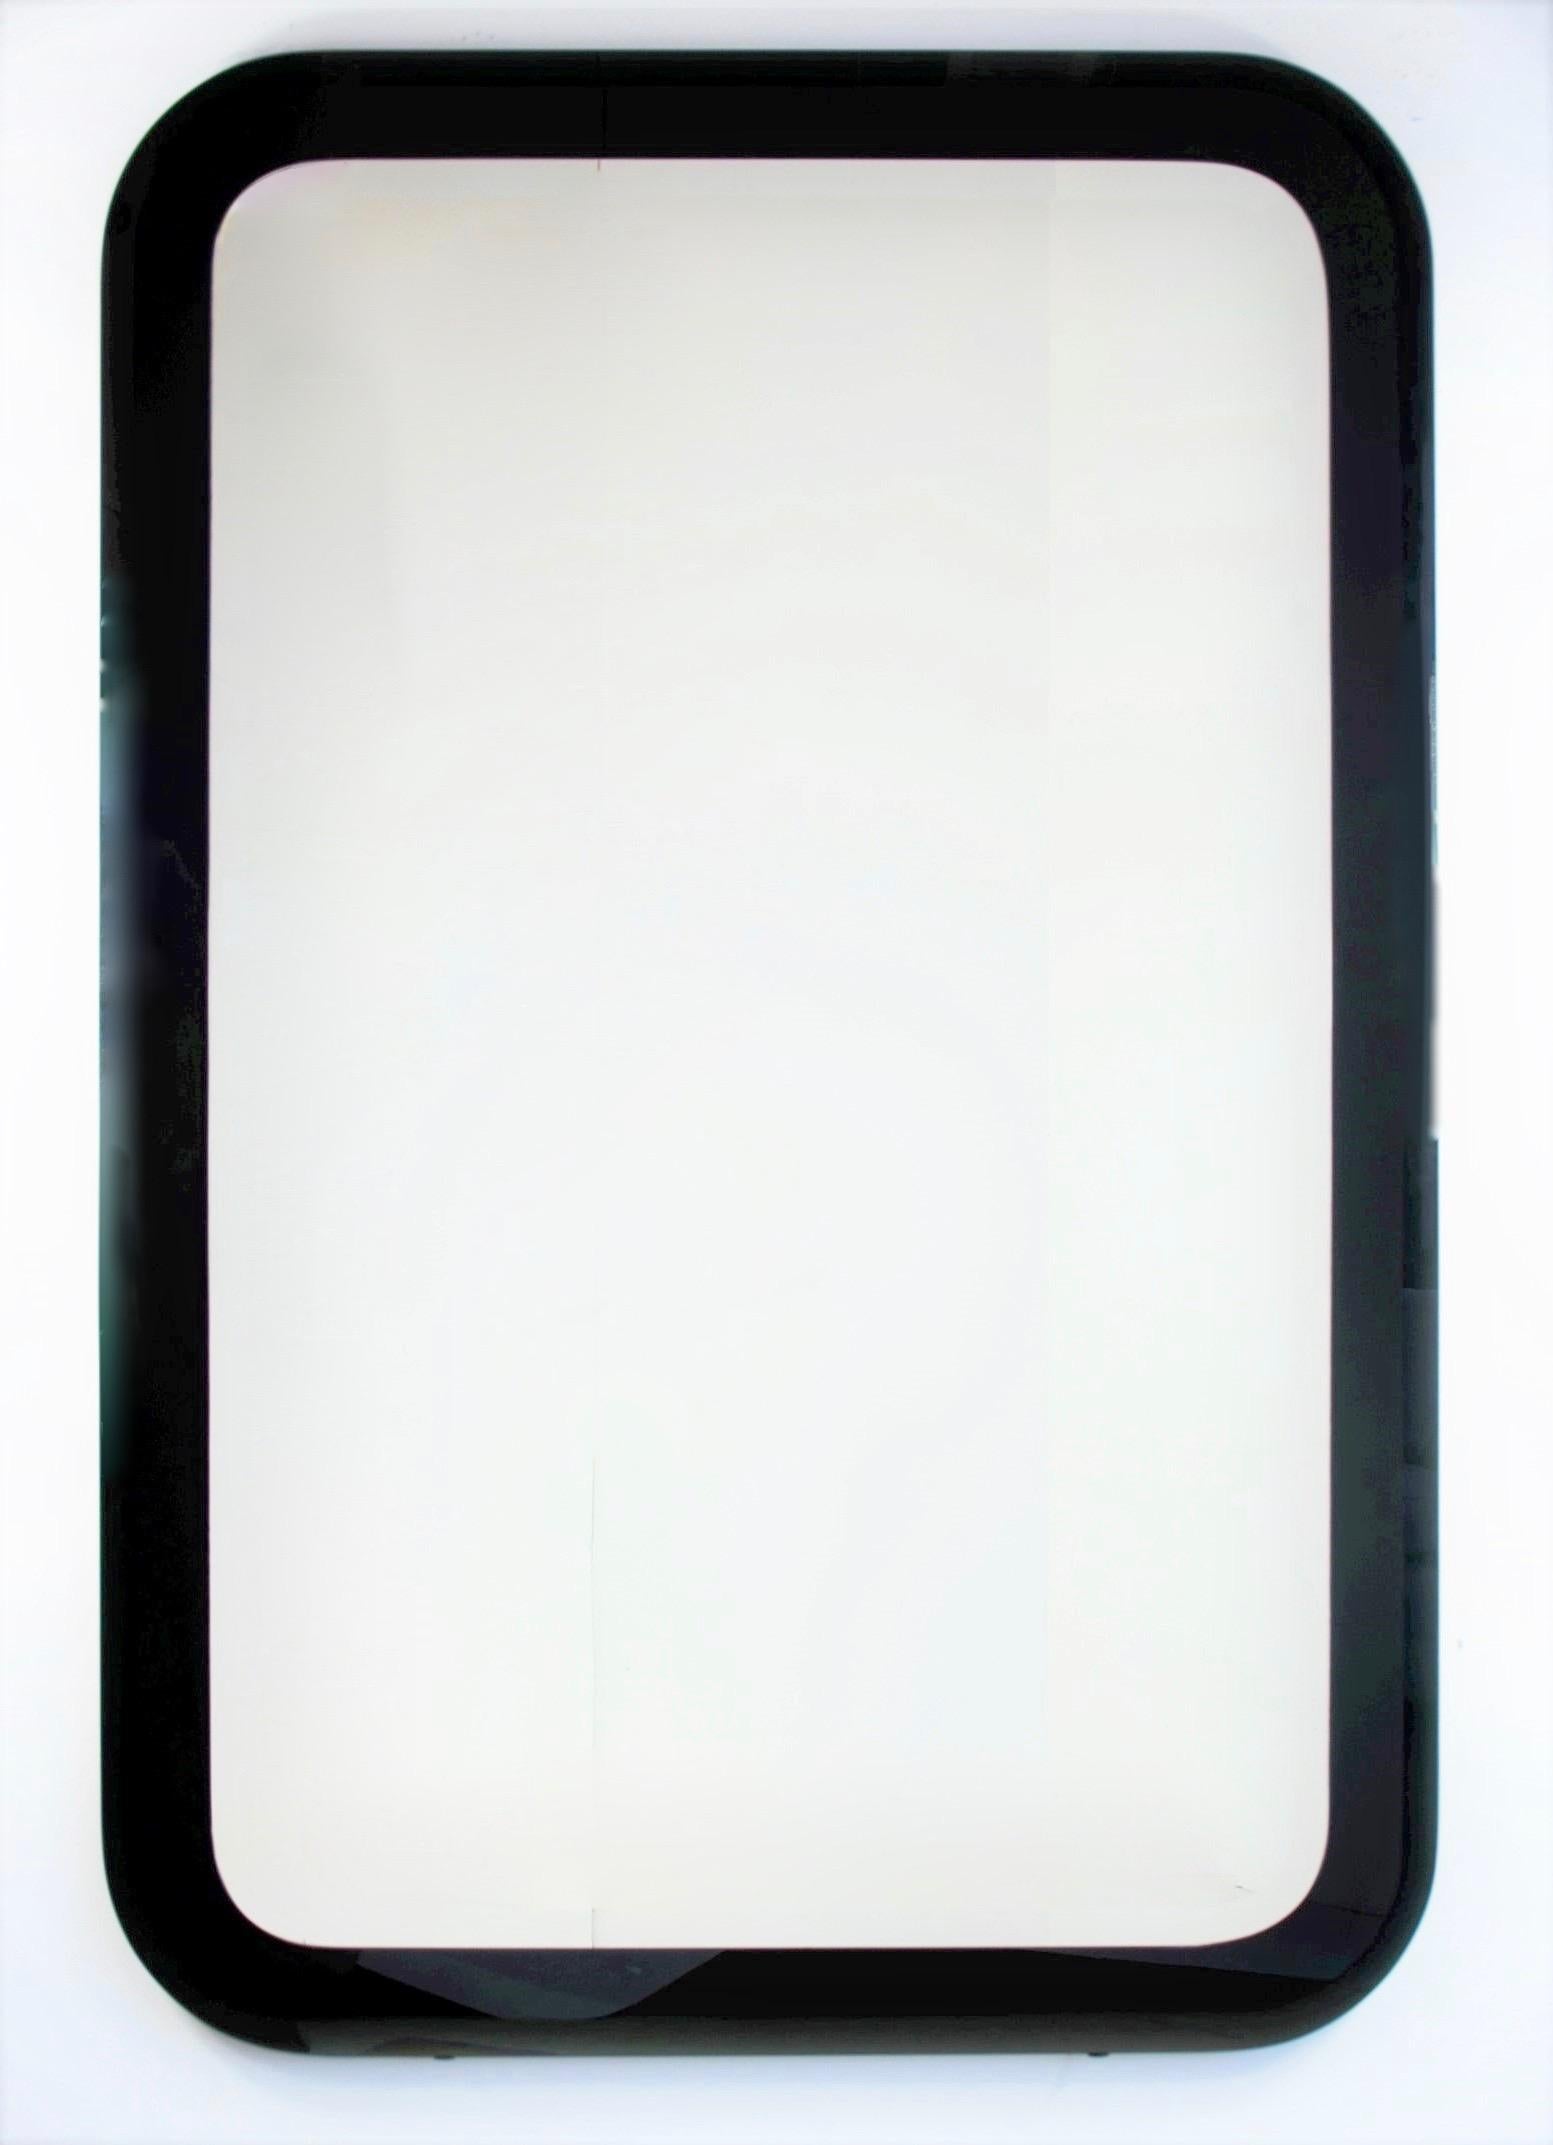 Offered is a 20th century custom decorative rectangle contemporary vintage beveled edge mirror with black glass frame. The generous size and elegant yet simple design of this mirror would be perfect for any genre of decor and in almost any space.